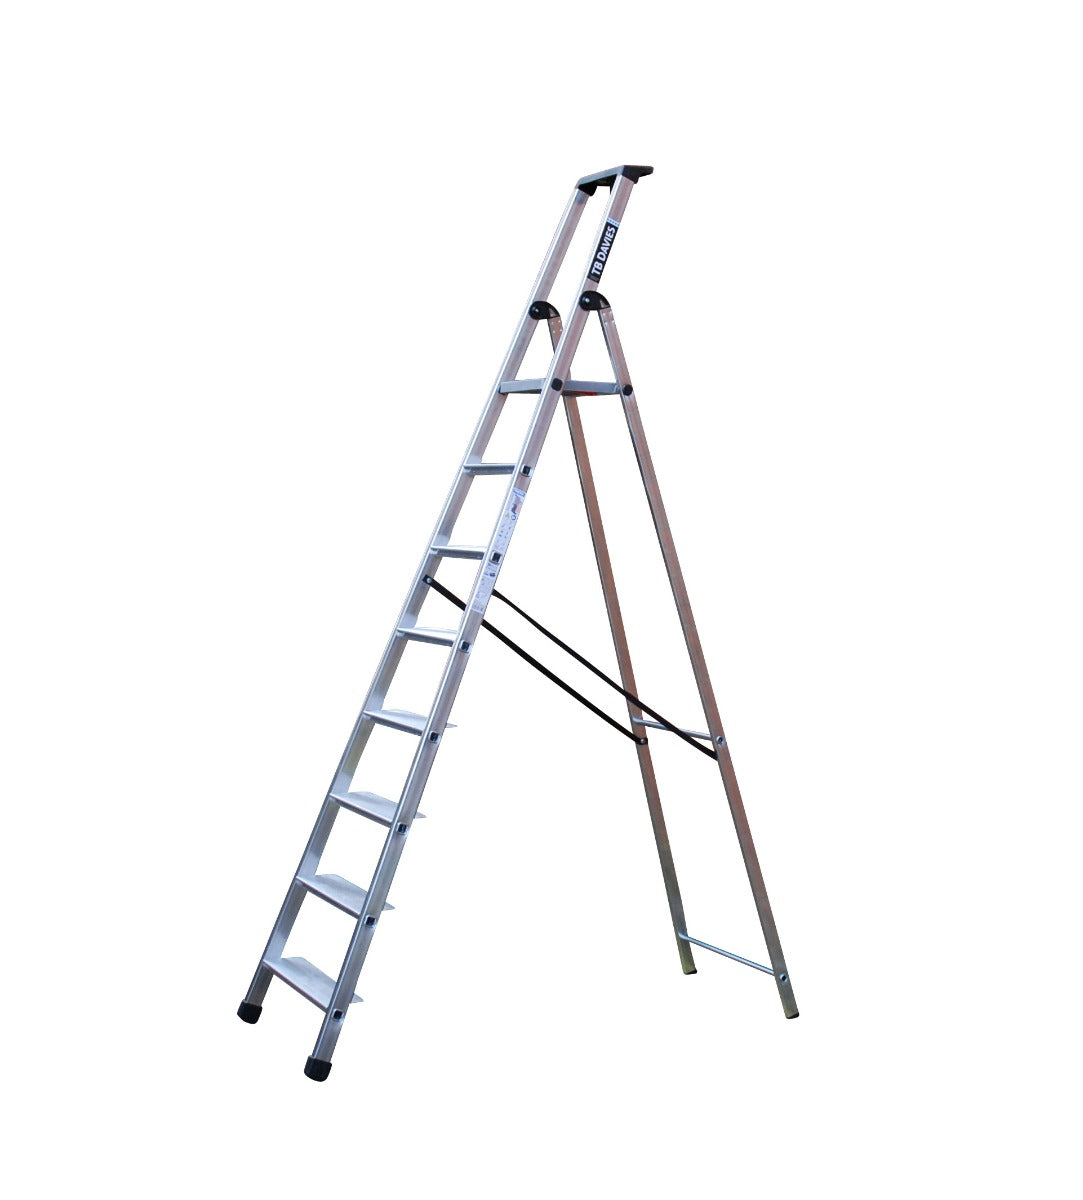 Maxi Platform Step Ladders With Wide Steps - 8 Tread